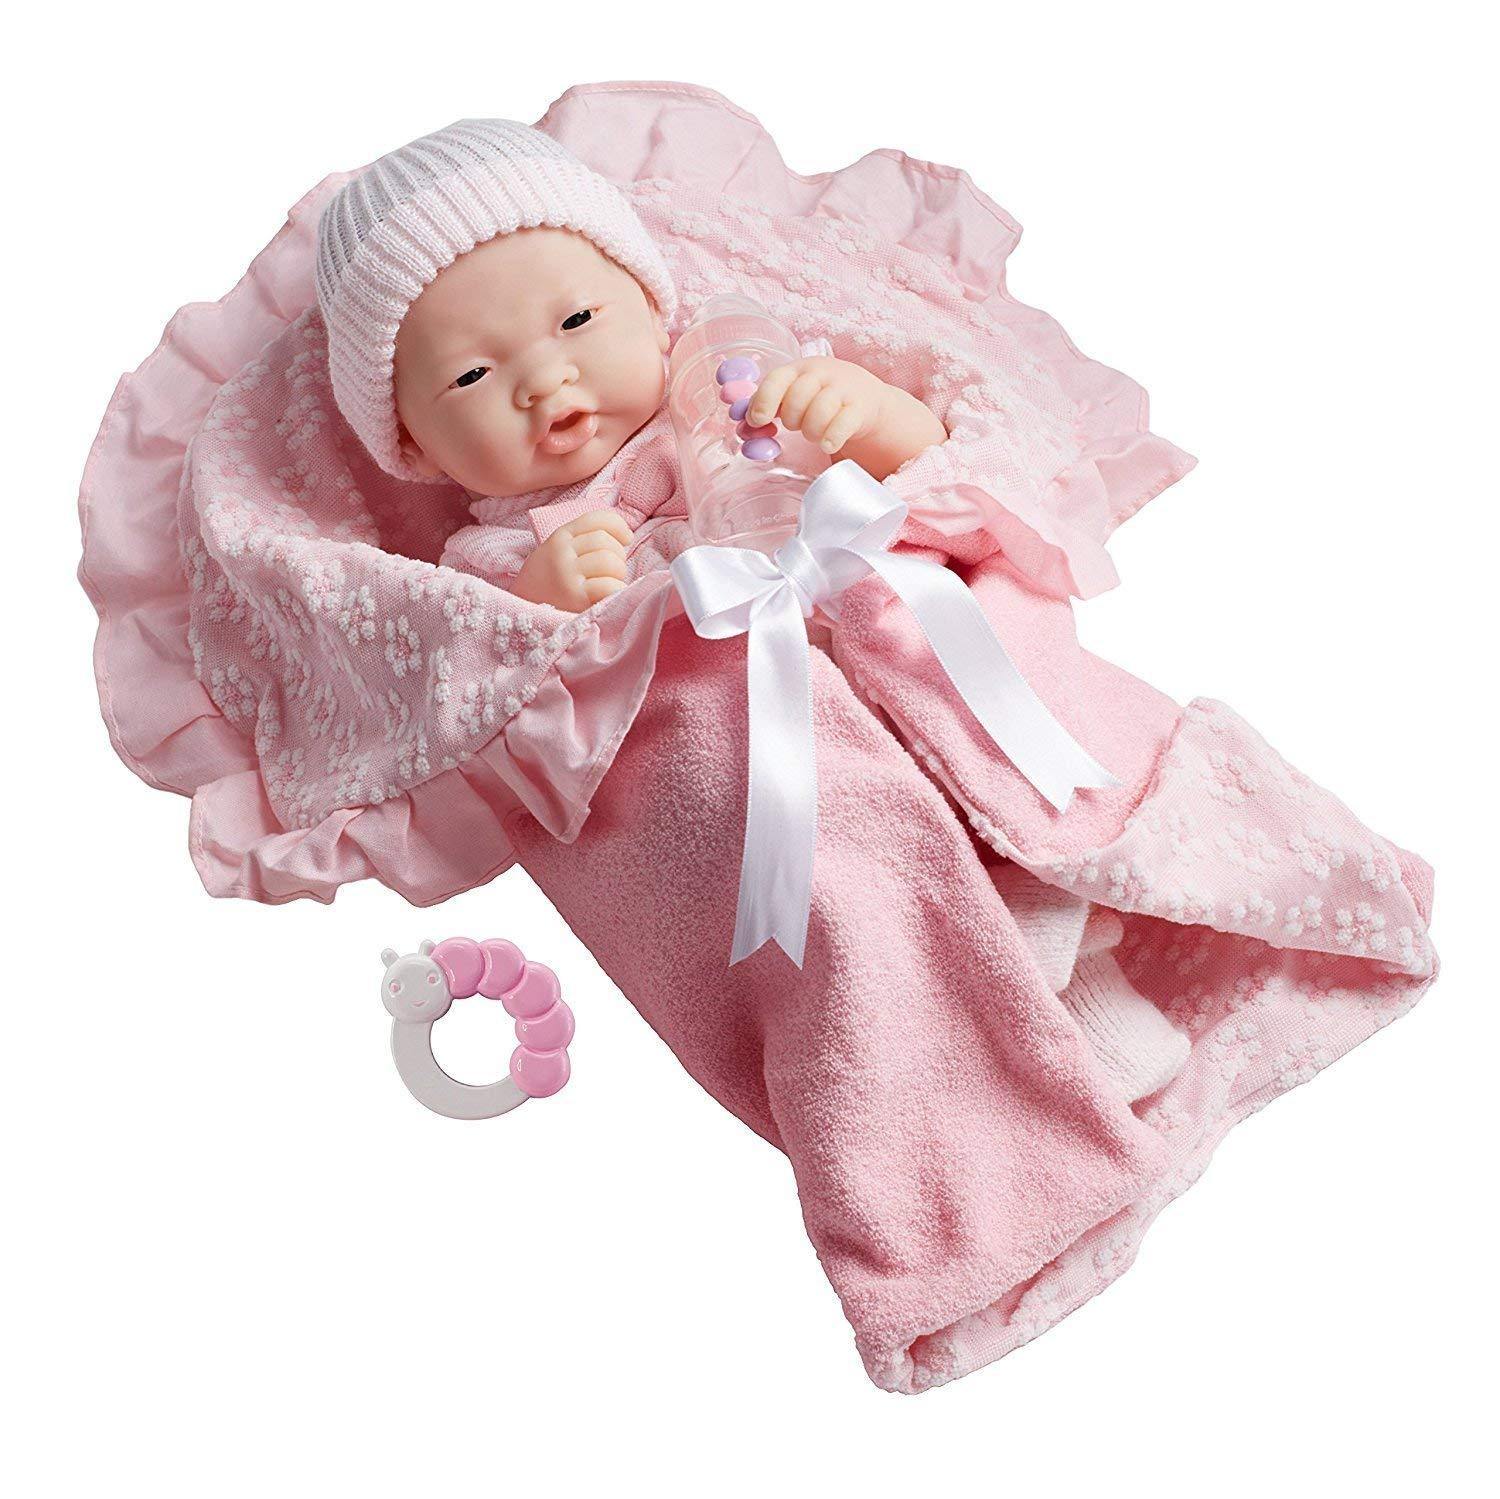 JC Toys, Soft Body La Newborn Asian Baby Doll 15.5in Deluxe Pink Layette Set - JC Toys Group Inc.